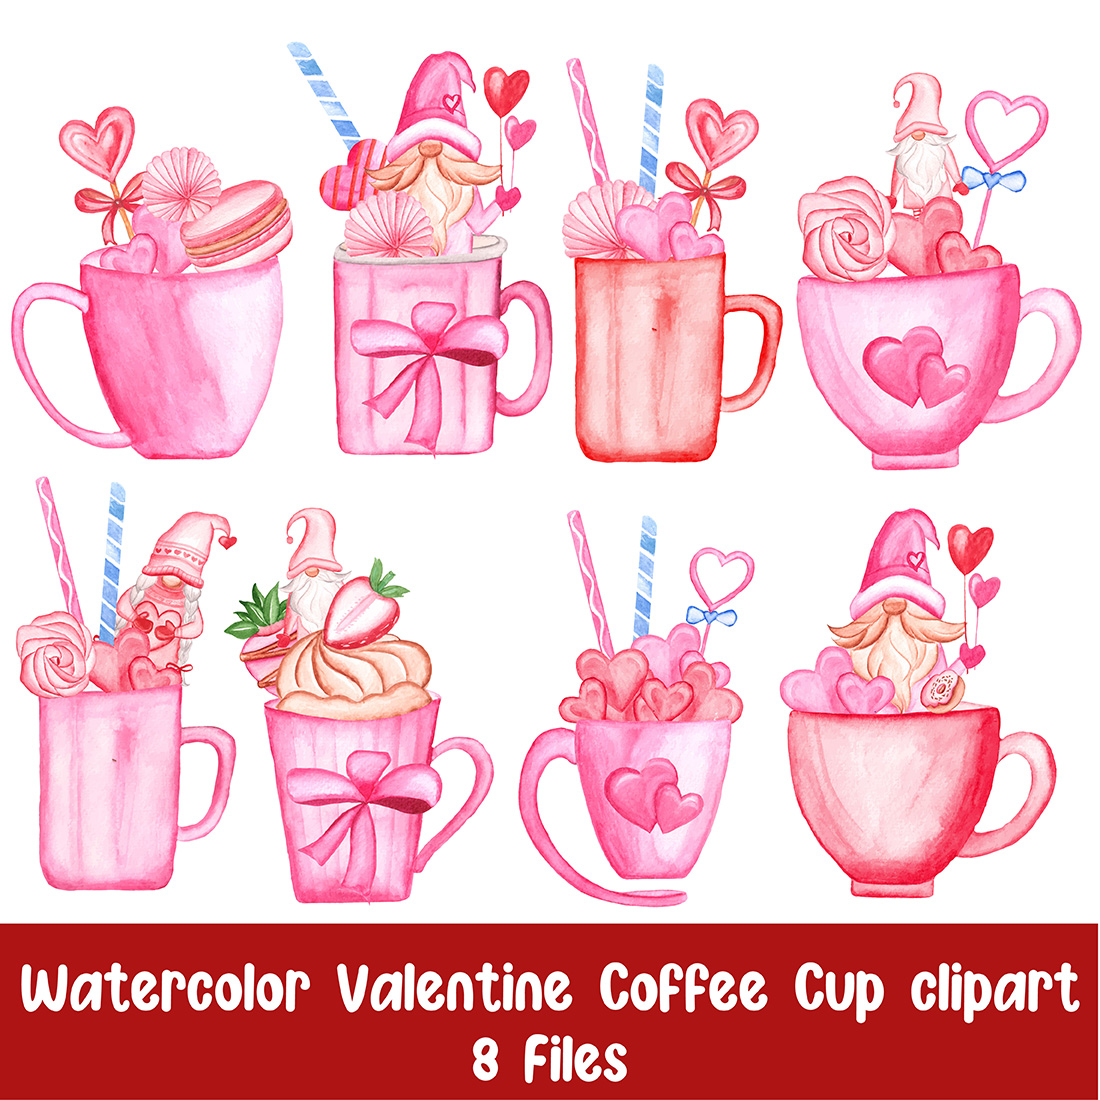 Watercolor Valentine Coffee Cup Clipart Set main cover.